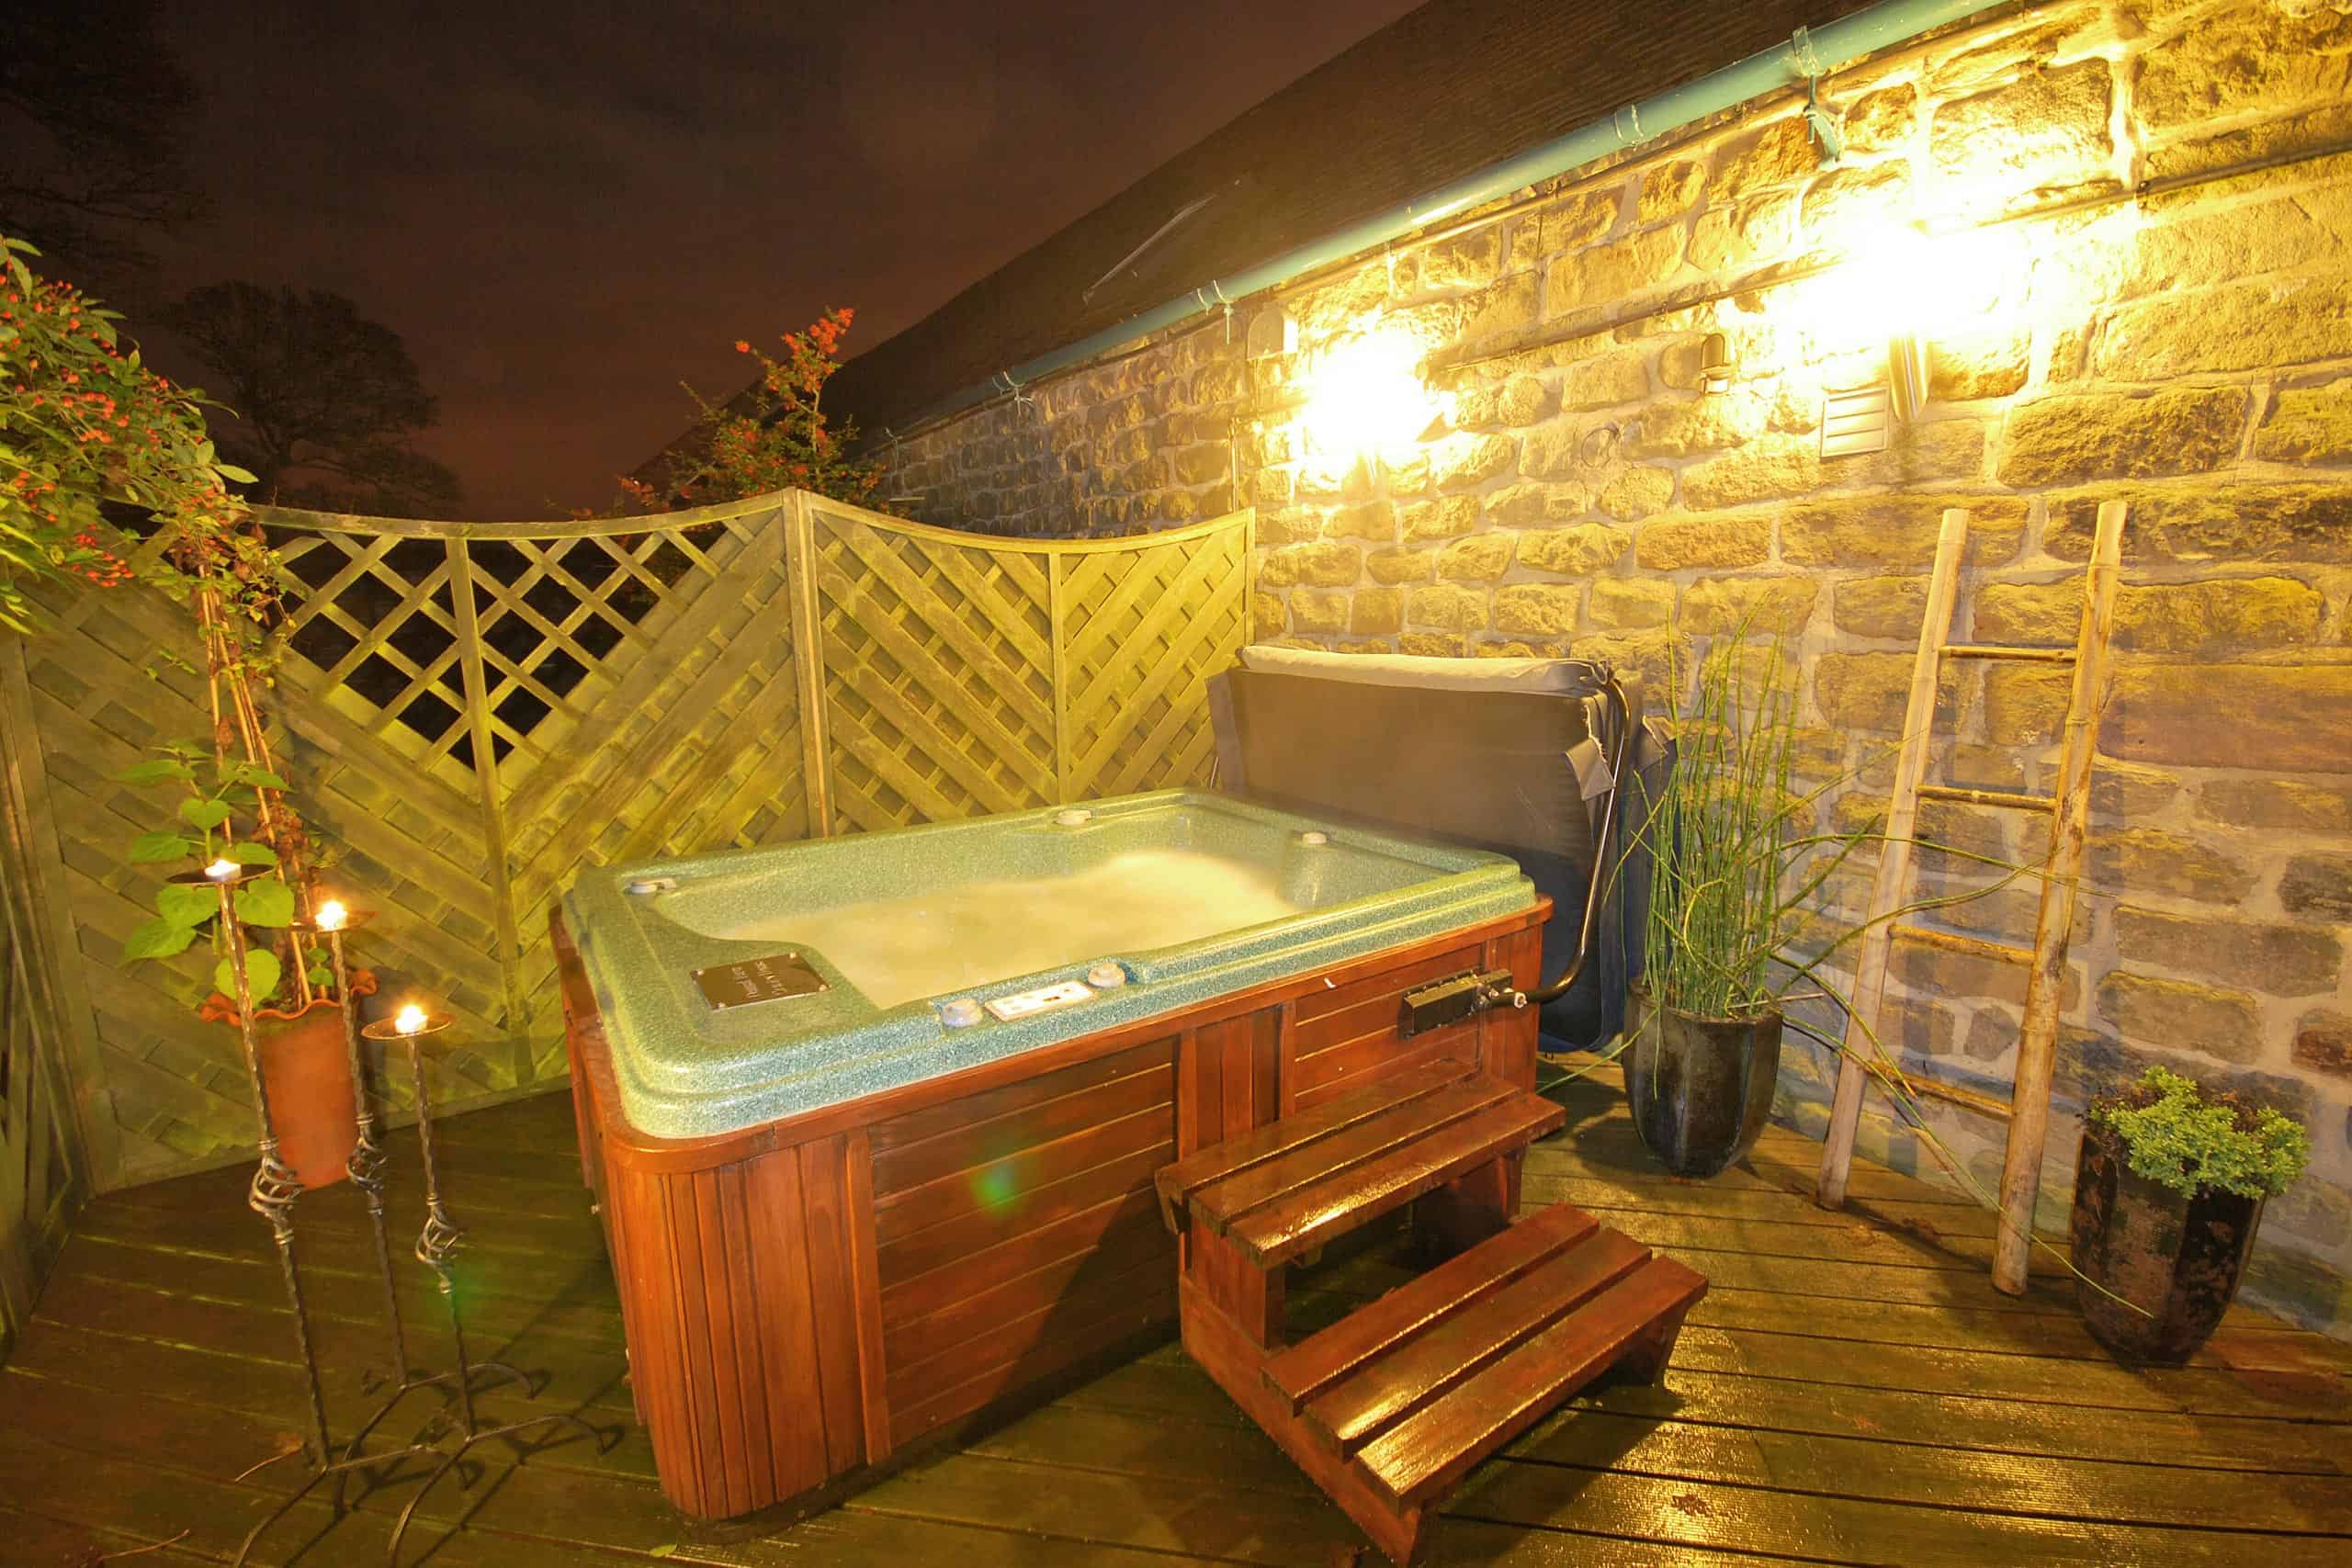 Accommodation with Hot Tub in the Derbyshire Dales, Peak District